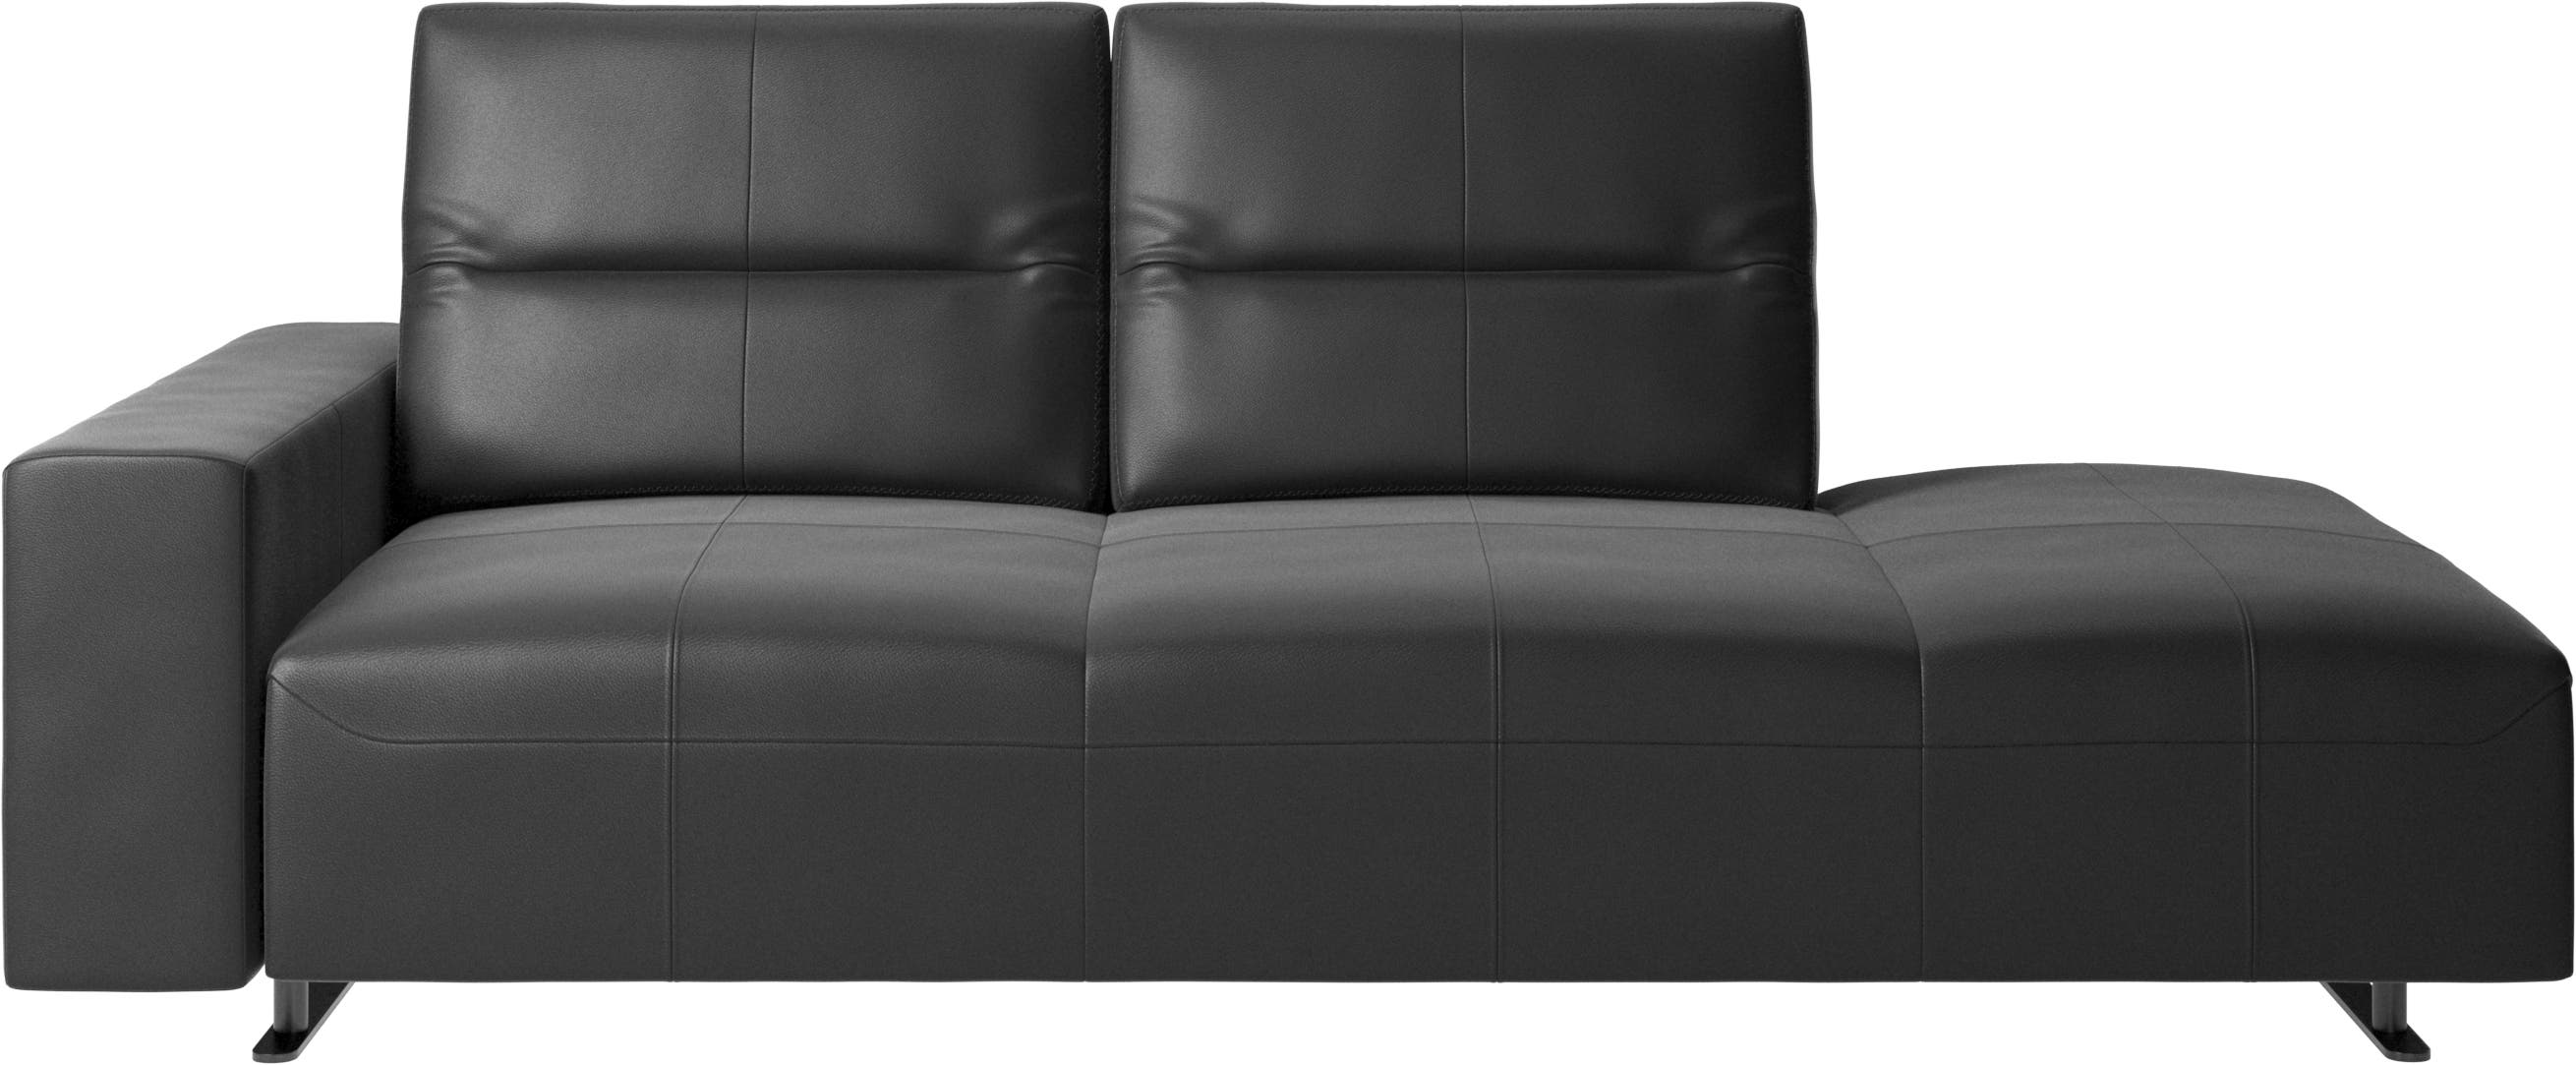 Hampton sofa with adjustable back and lounging unit right side, storage and armrest left side